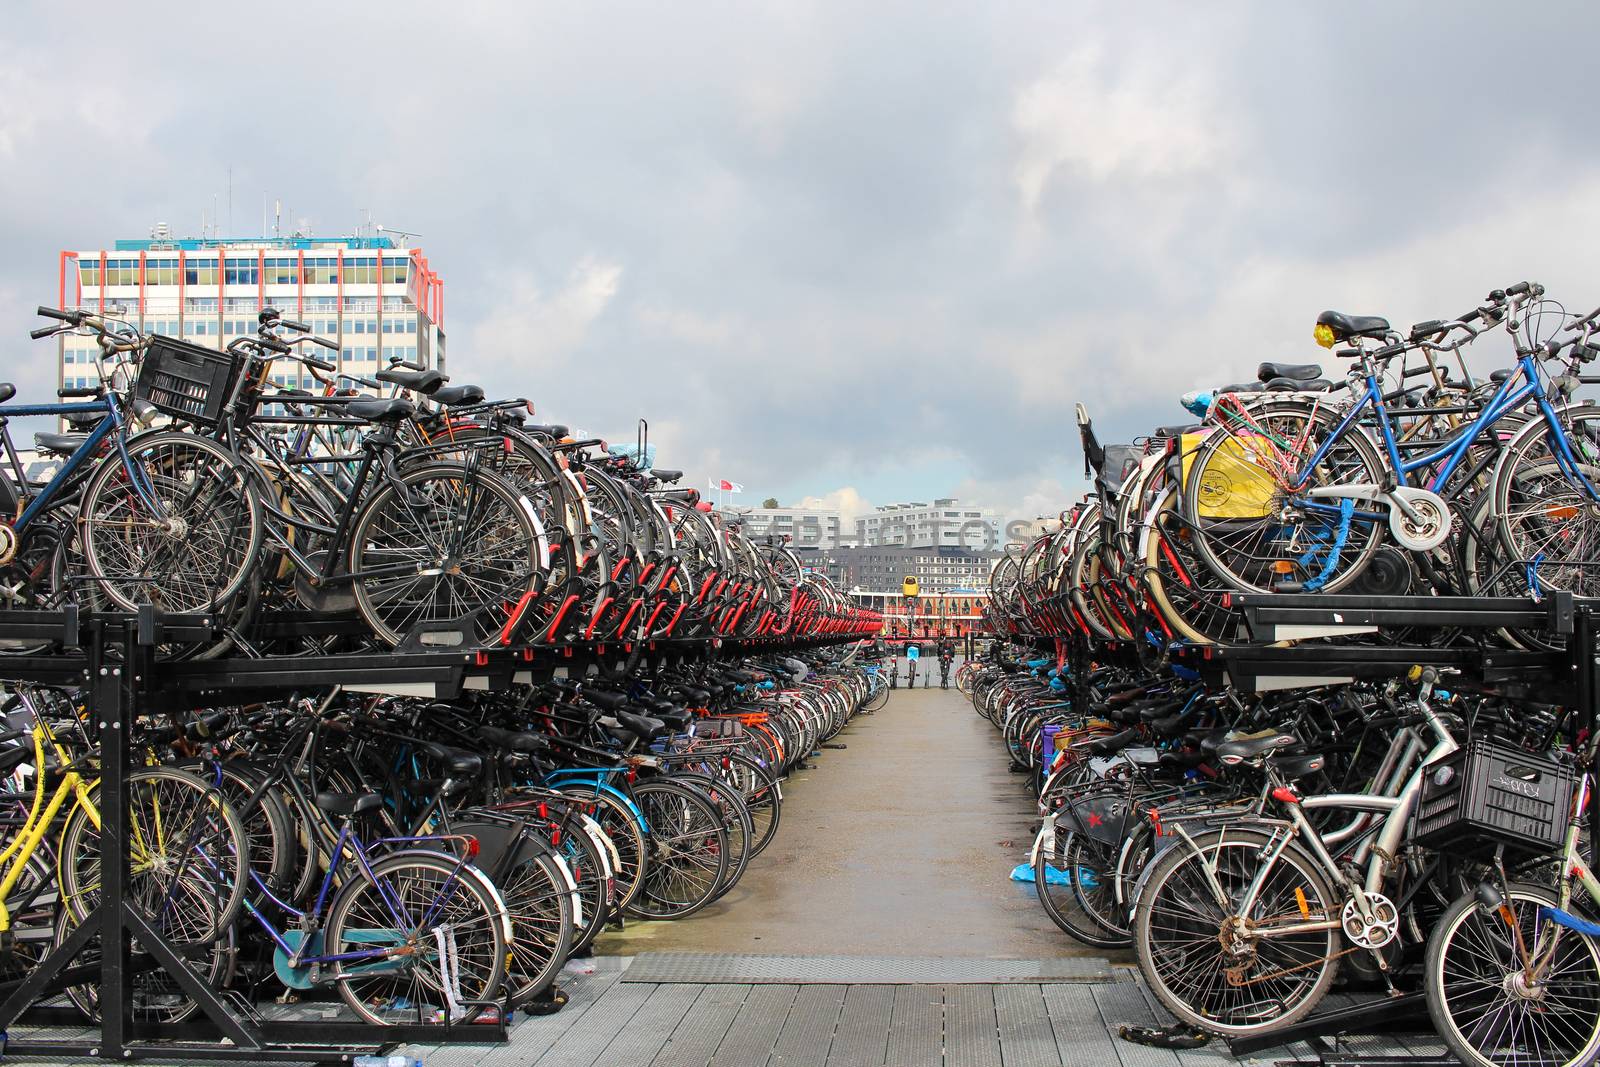 Typical bicycle parking in Amsterdam, Netherlands by ziss